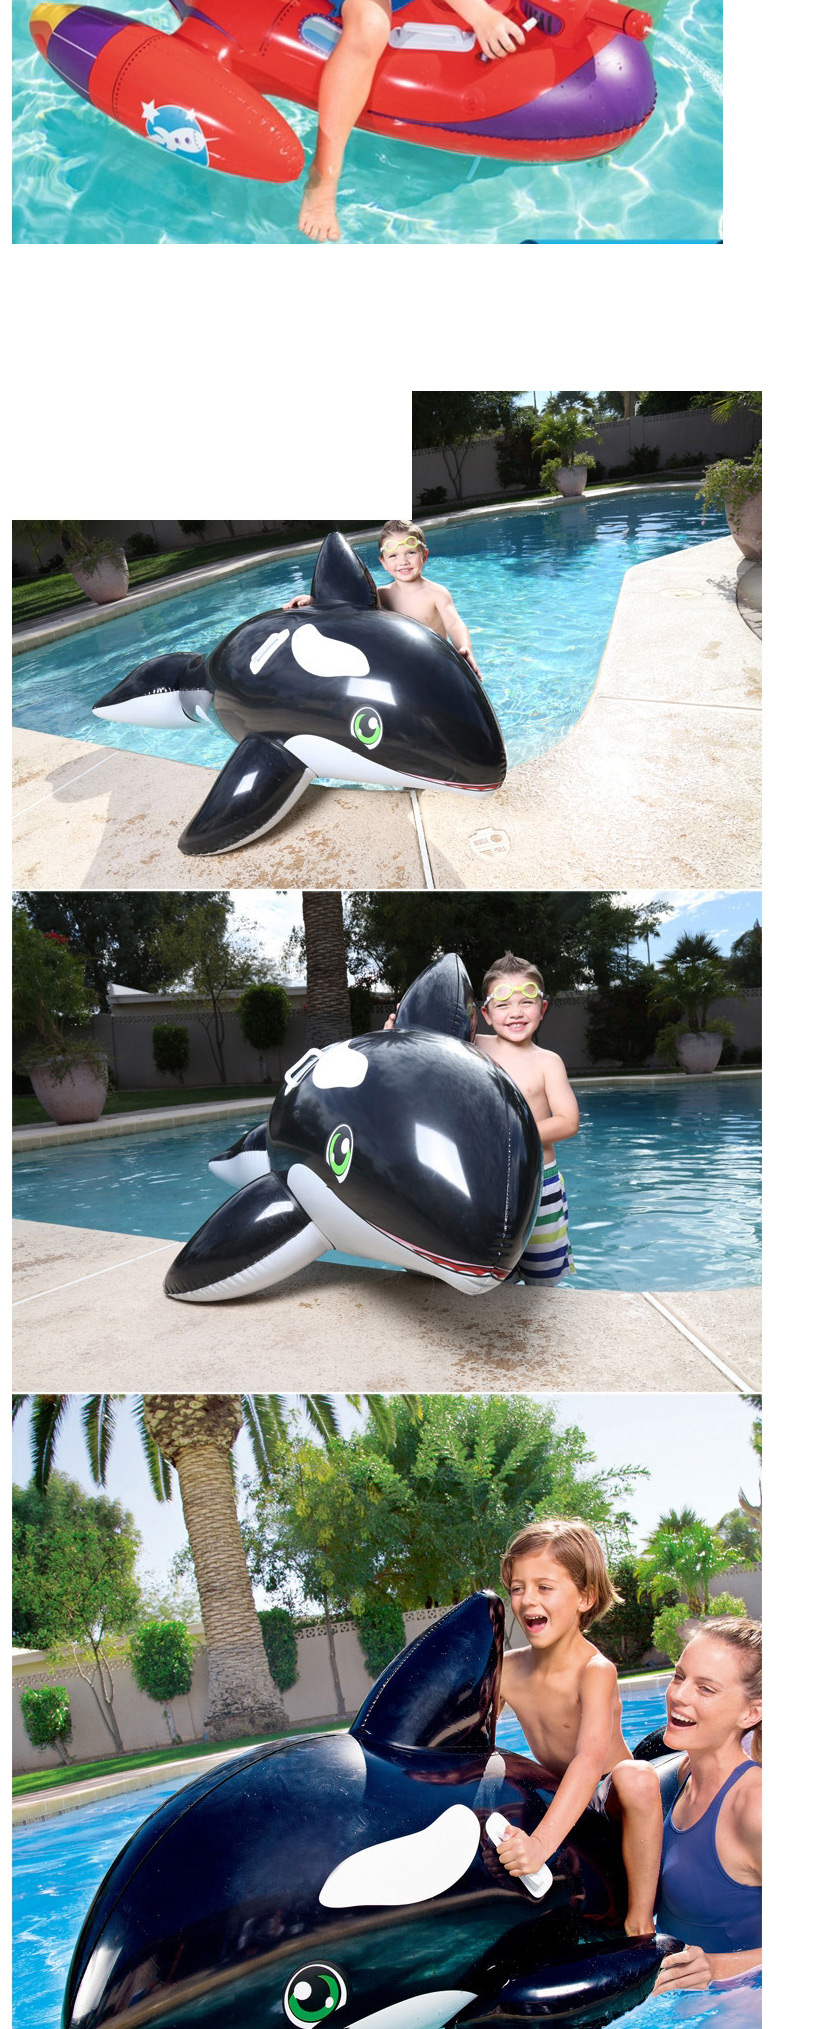 Fashion Green Electric Rays Water Animal Inflatable Mount Toy Floating Bed,Swim Rings